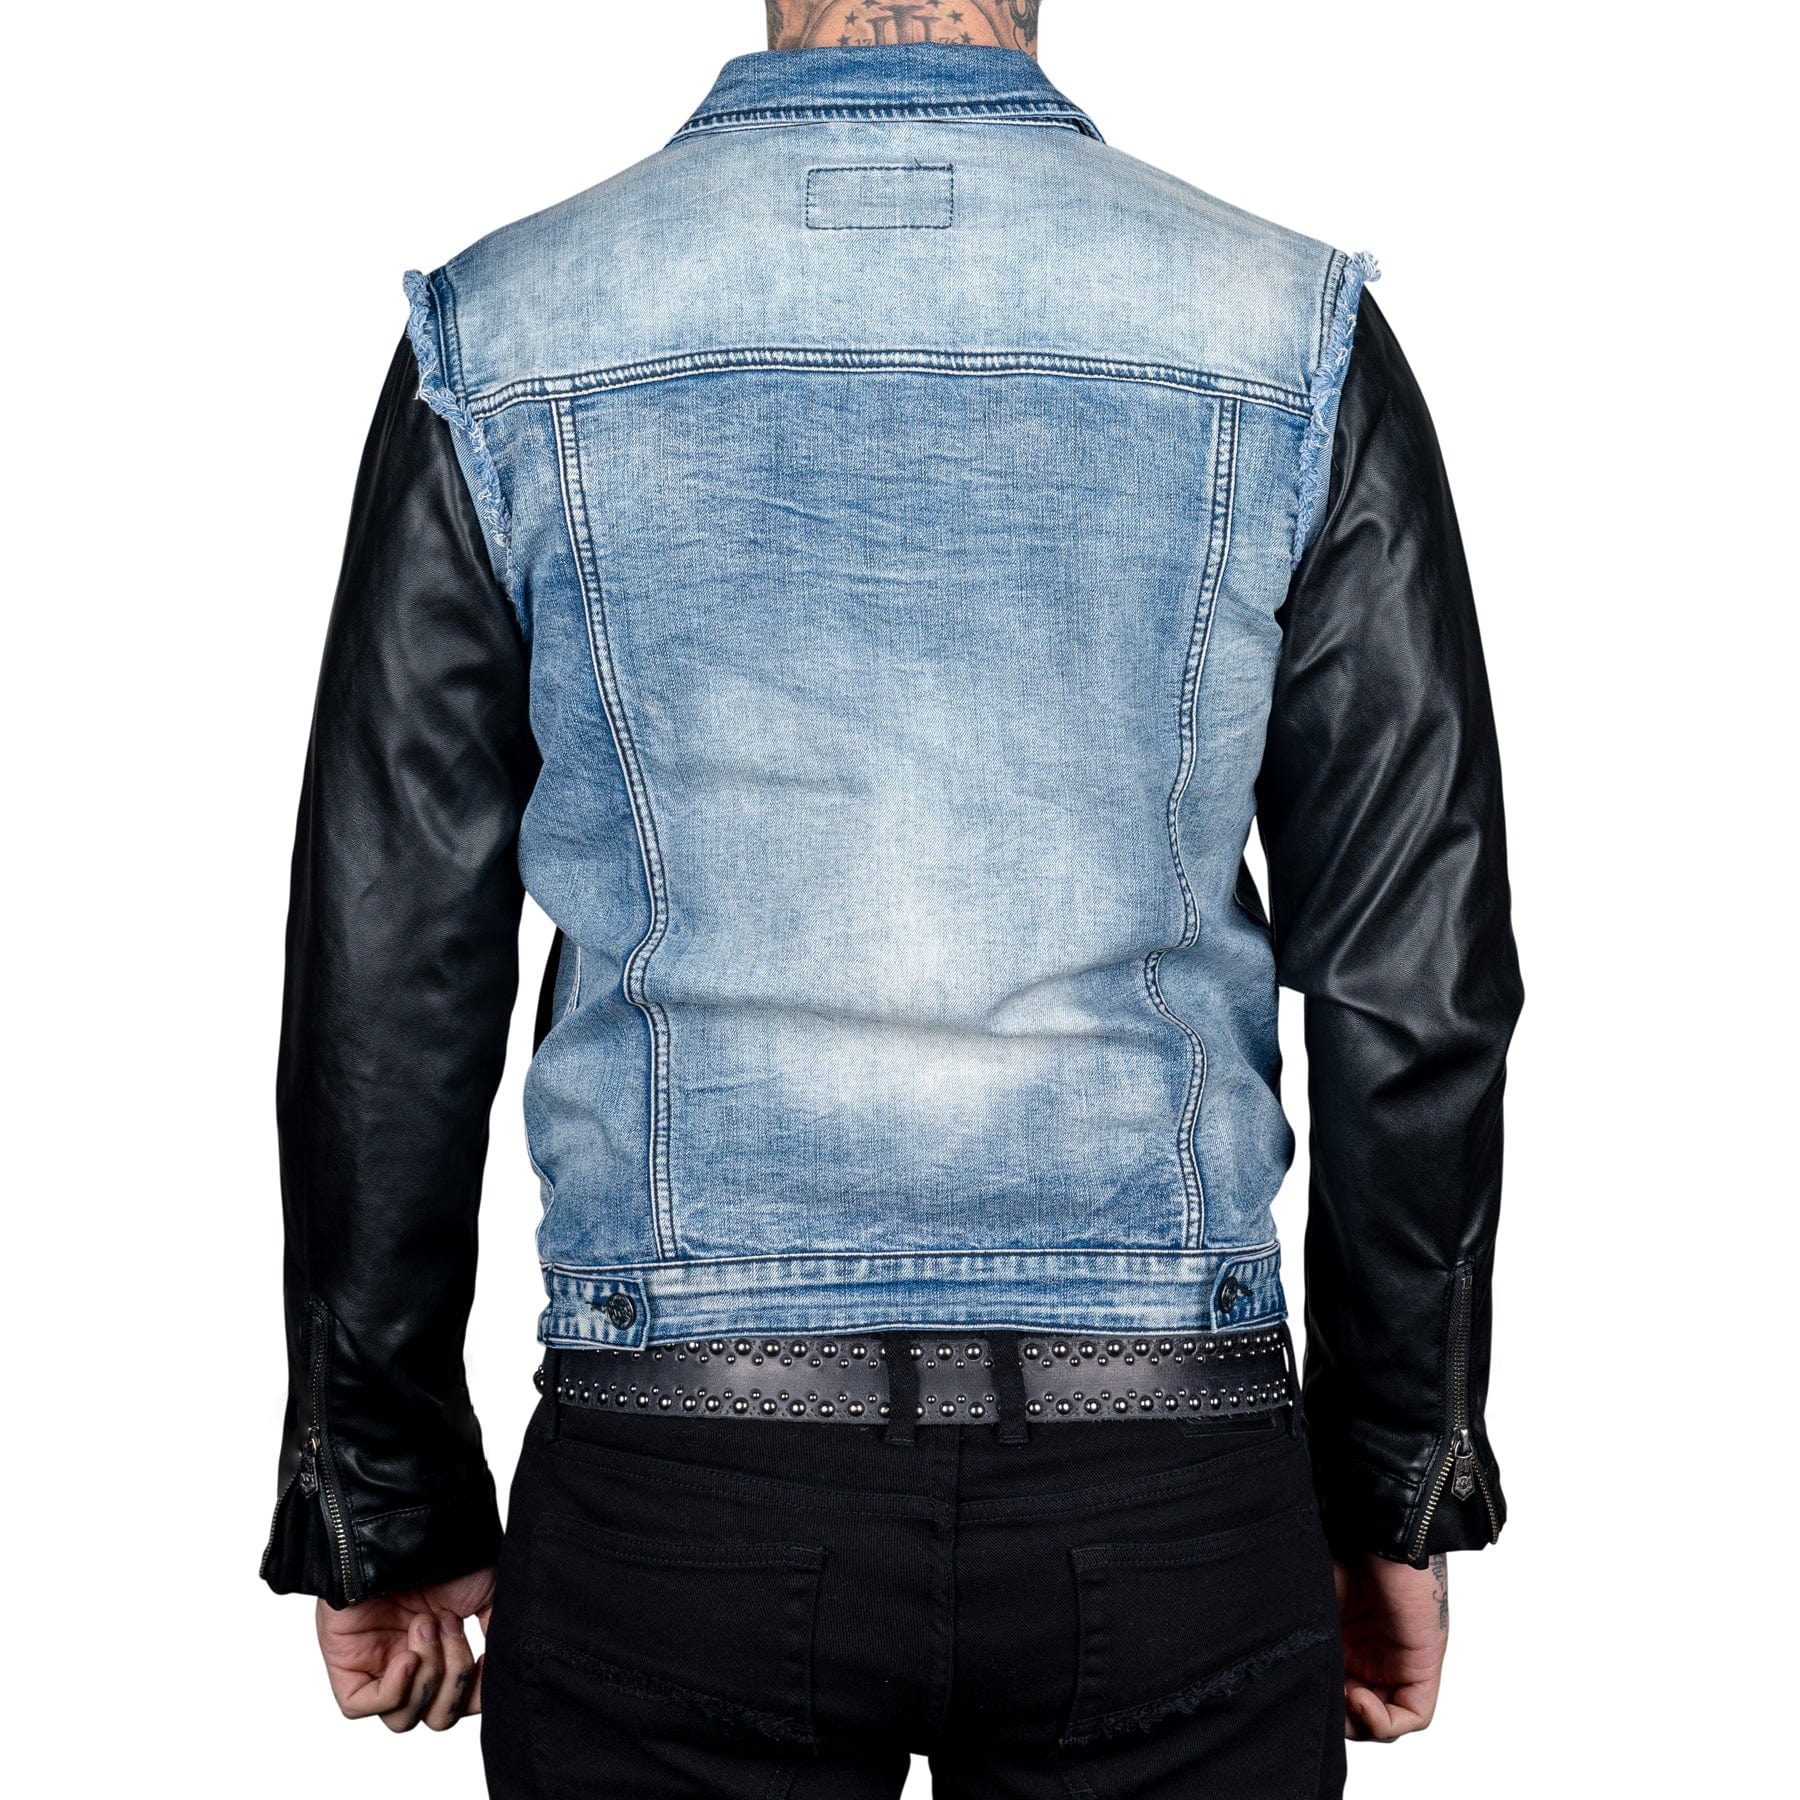 All Access Collection Jacket Whiplash Jacket